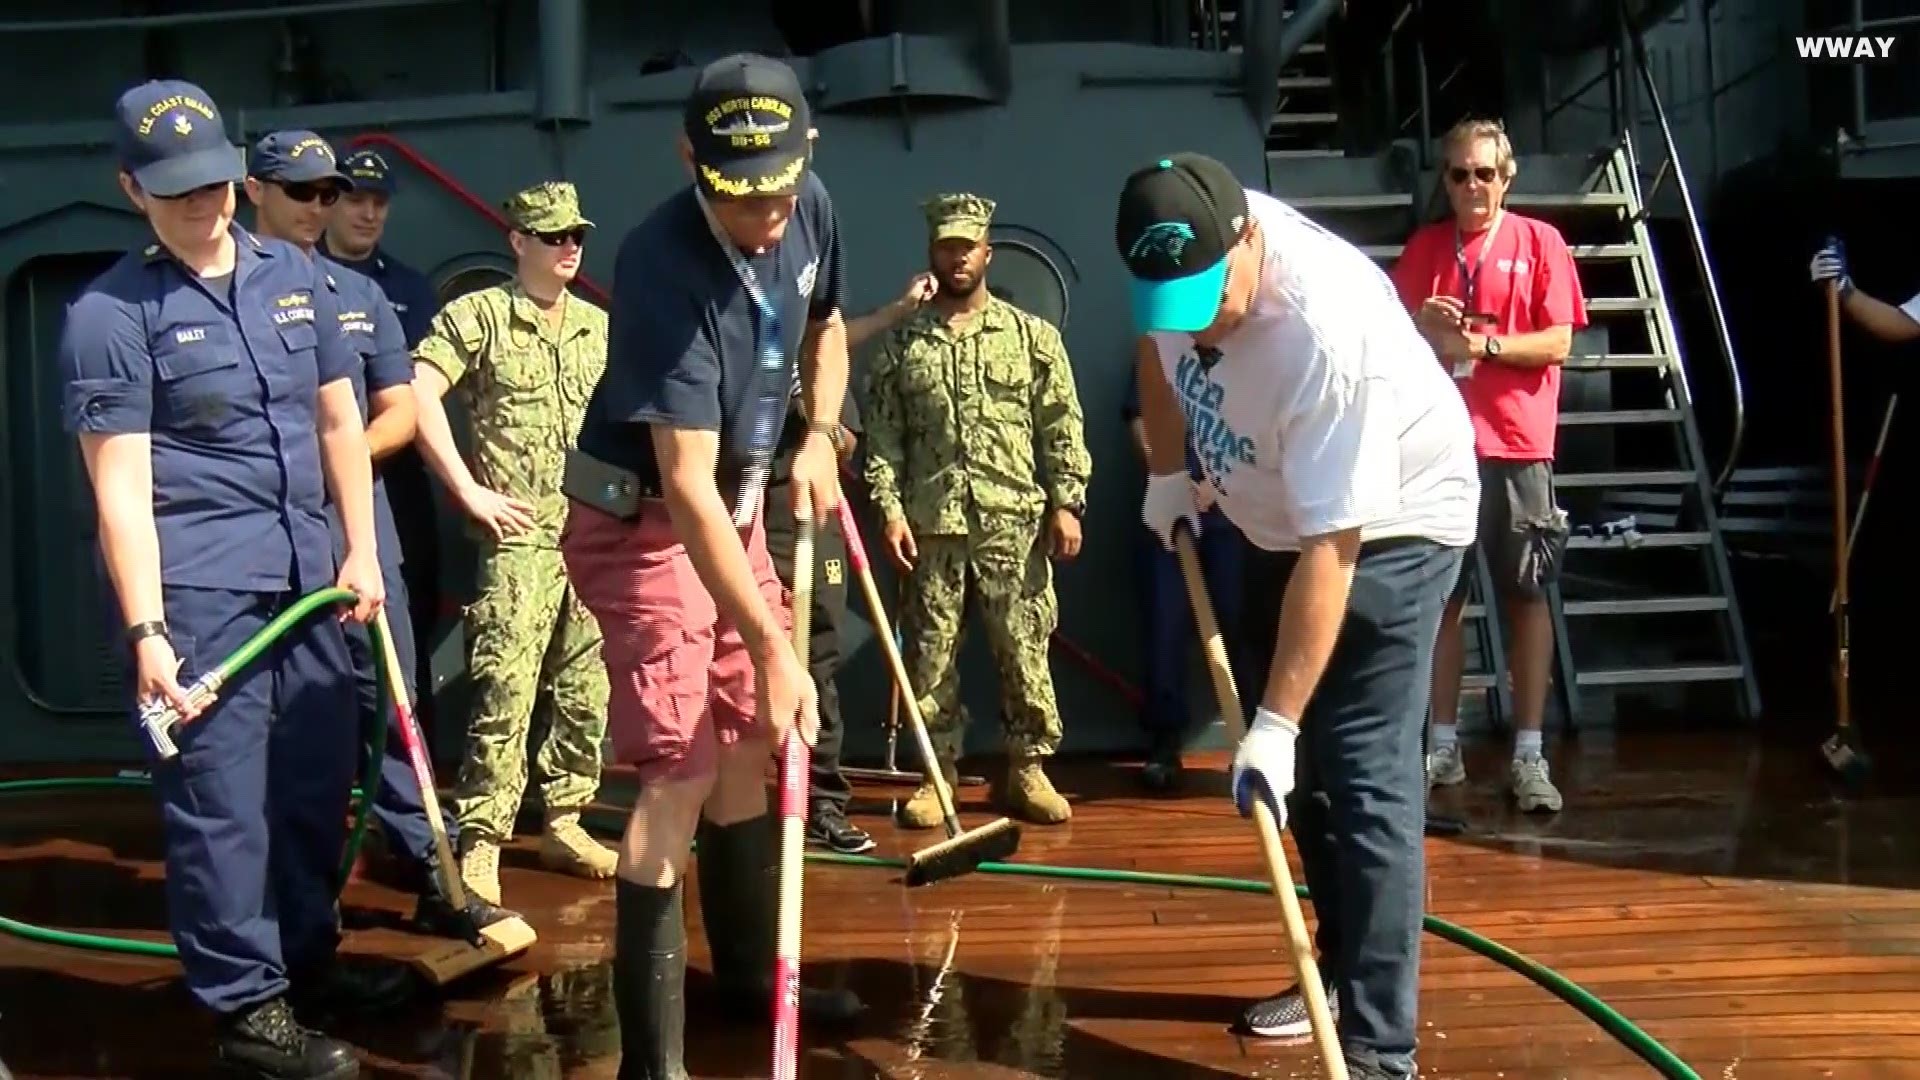 "Keep Pounding Day' kicked-off as Panthers' Owner David Tepper boarded the Battleship North Carolina to lend a helping hand. He volunteered to scrub the decks of the battleship.